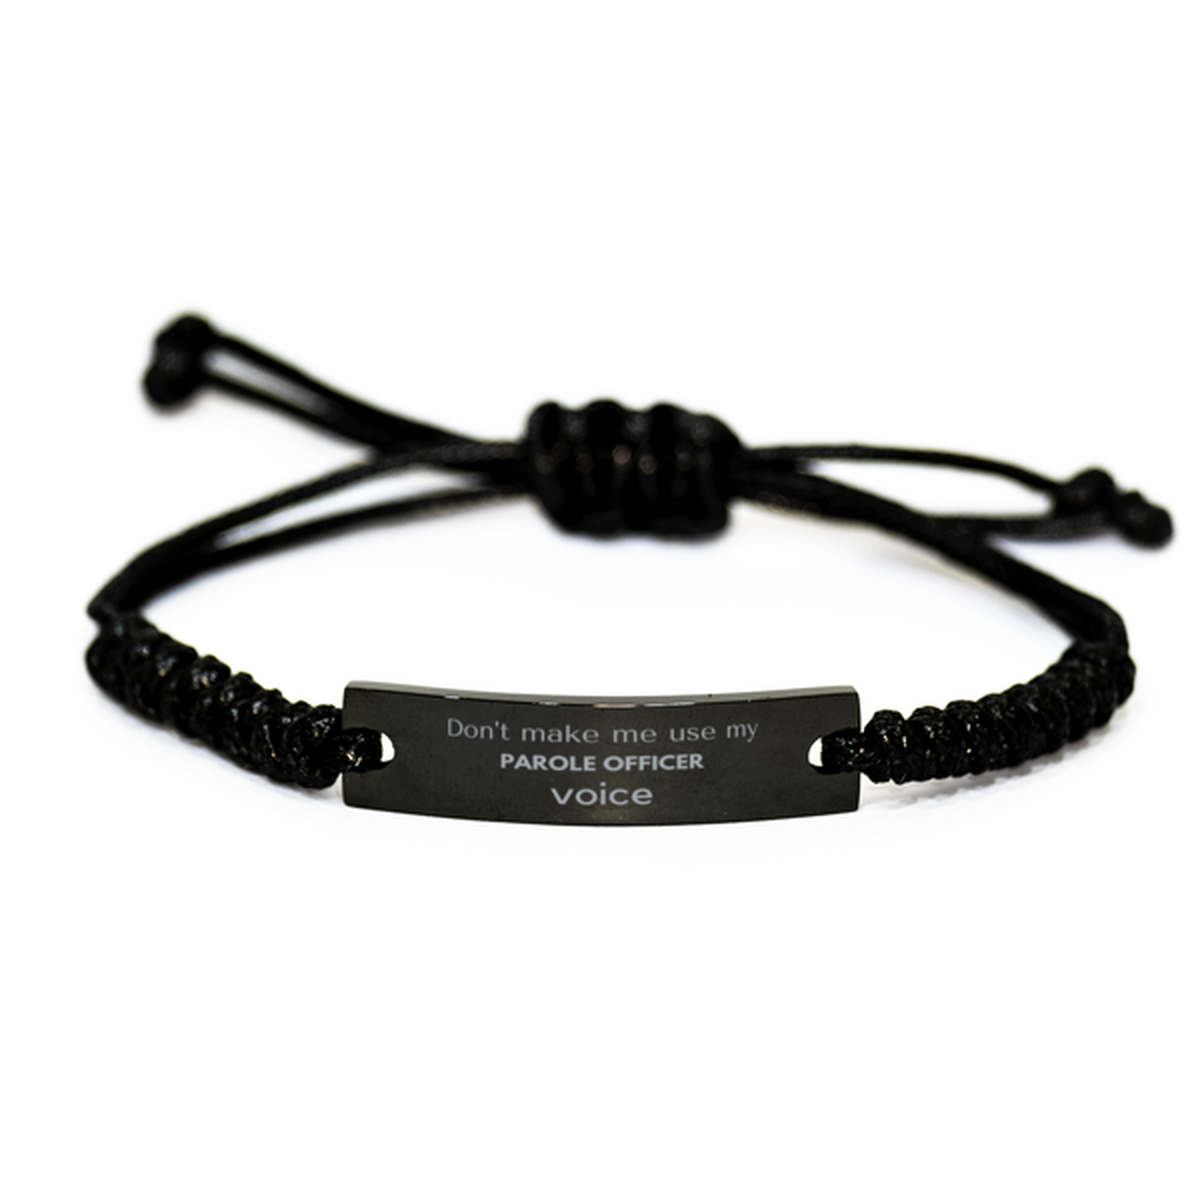 Don't make me use my Parole Officer voice, Sarcasm Parole Officer Gifts, Christmas Parole Officer Black Rope Bracelet Birthday Unique Gifts For Parole Officer Coworkers, Men, Women, Colleague, Friends